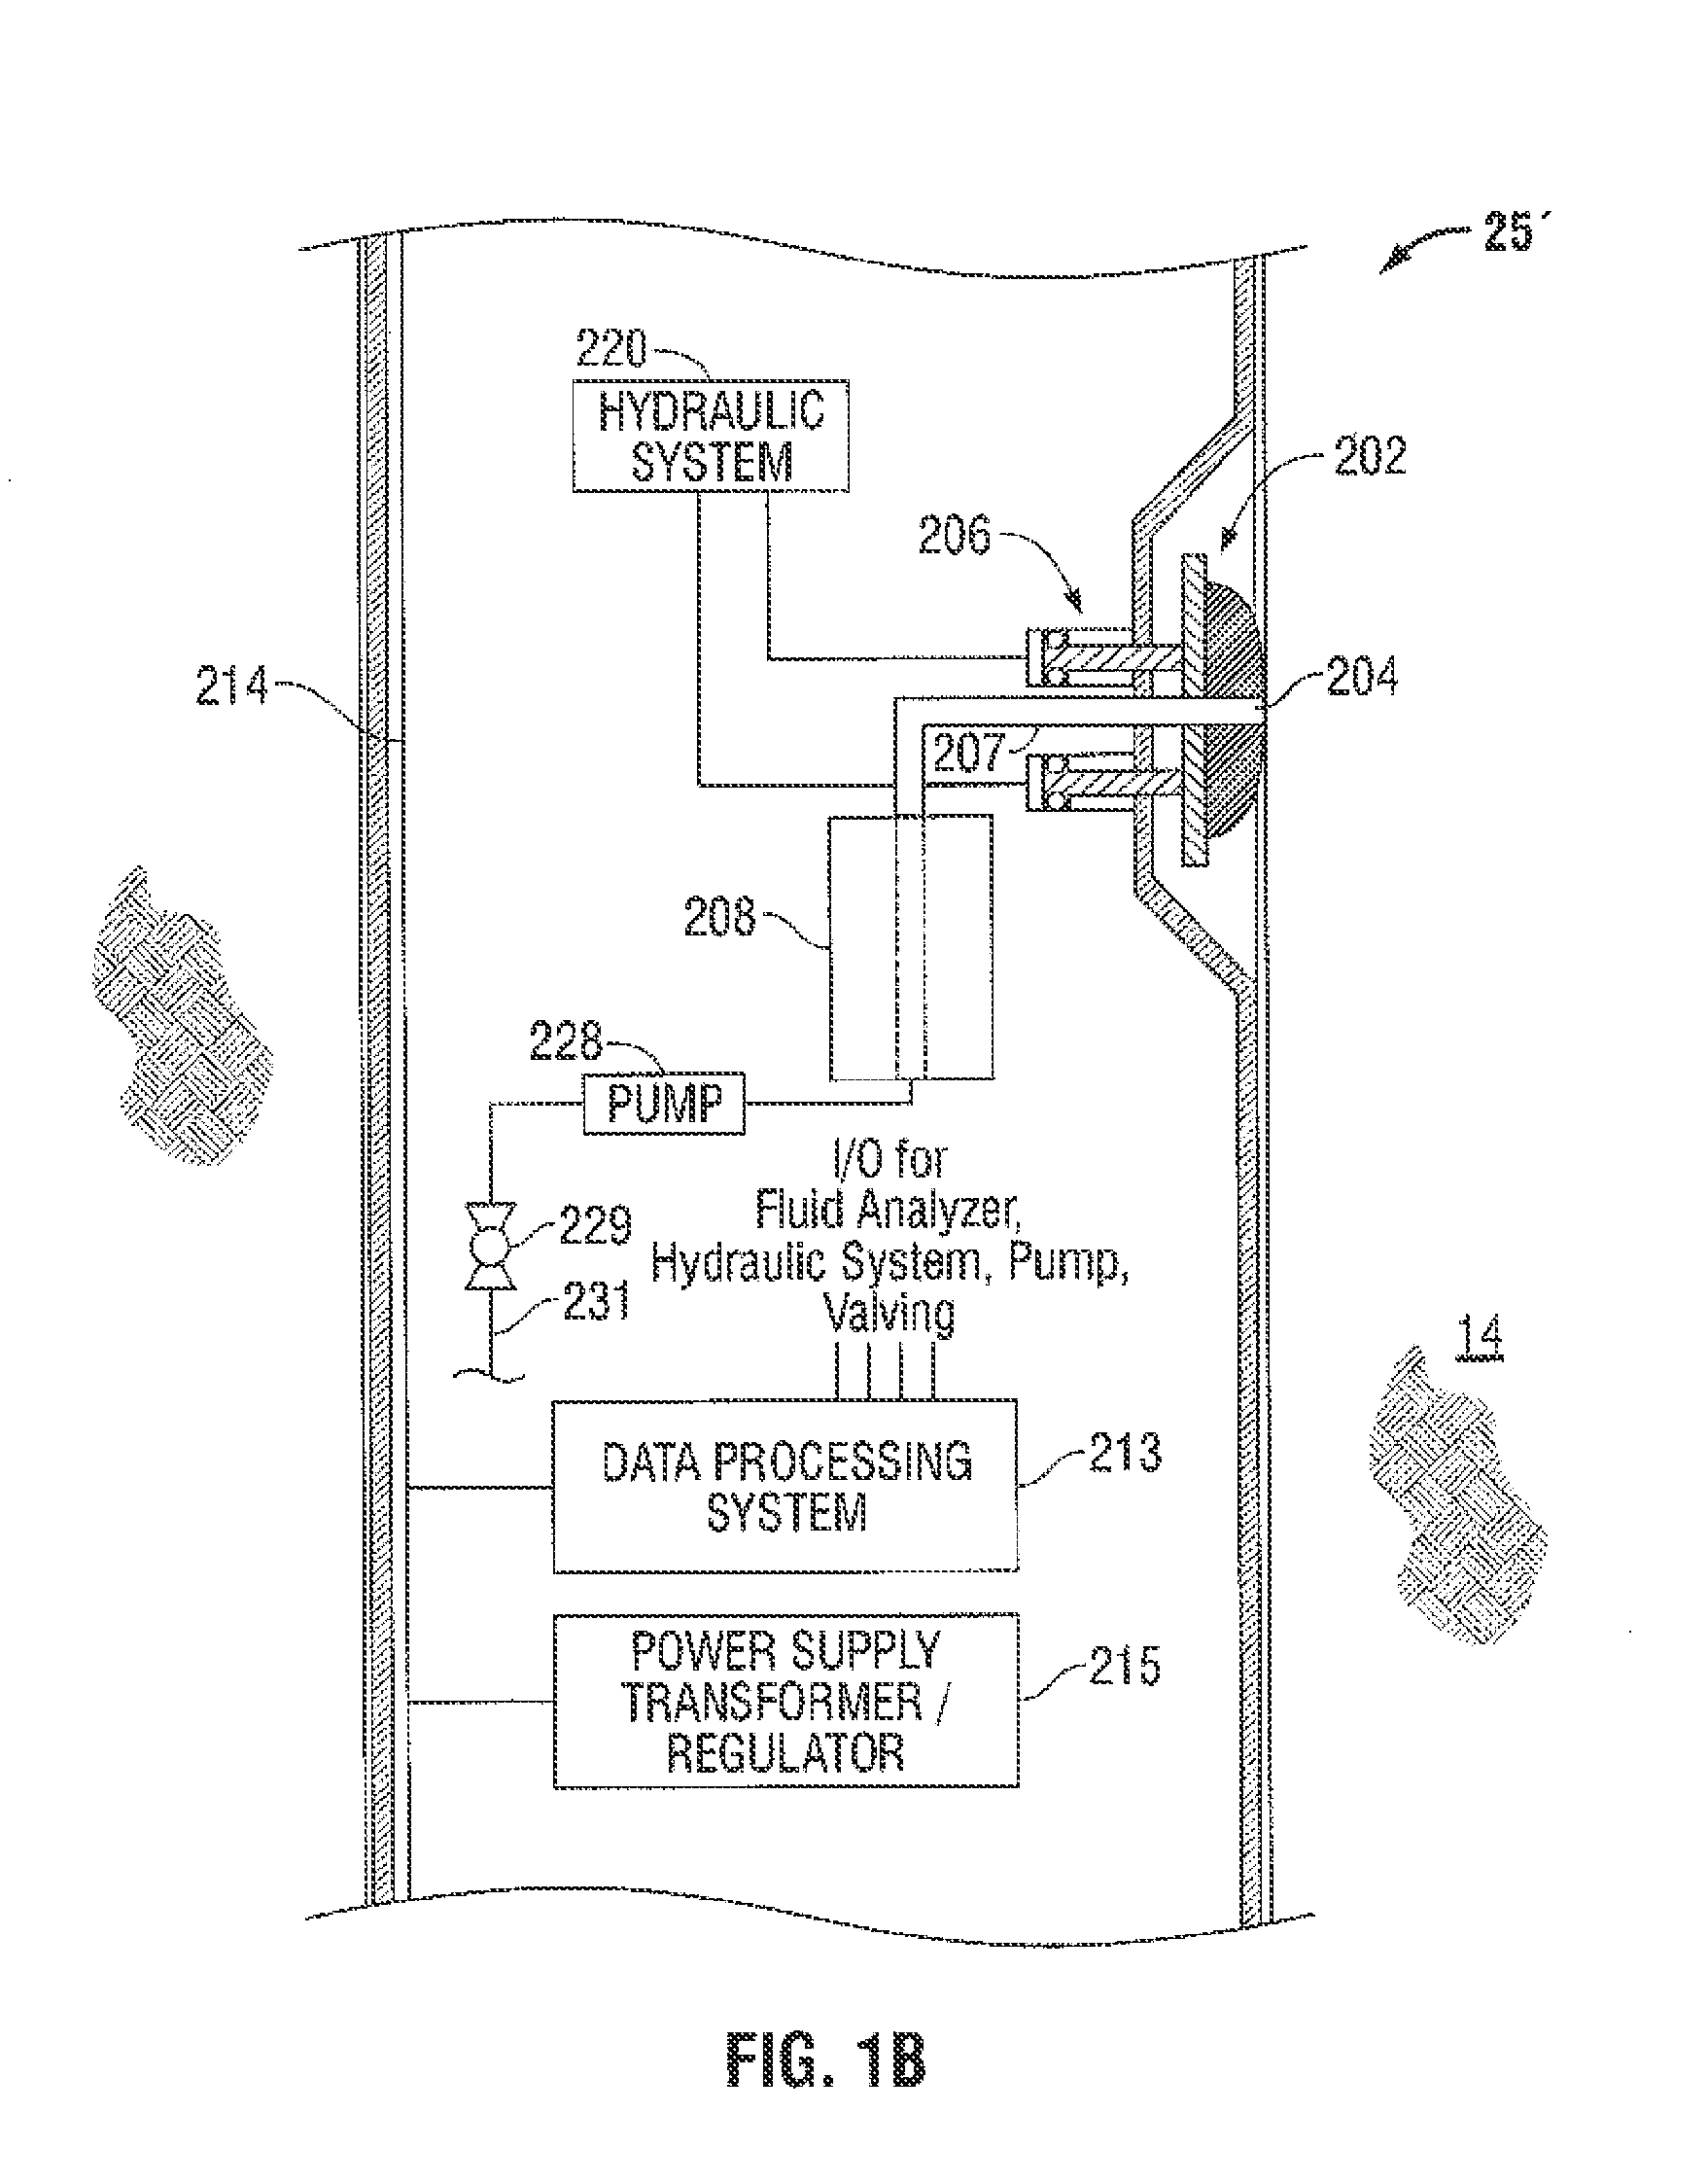 Methods and apparatus for characterization of petroleum fluid employing analysis of high molecular weight components